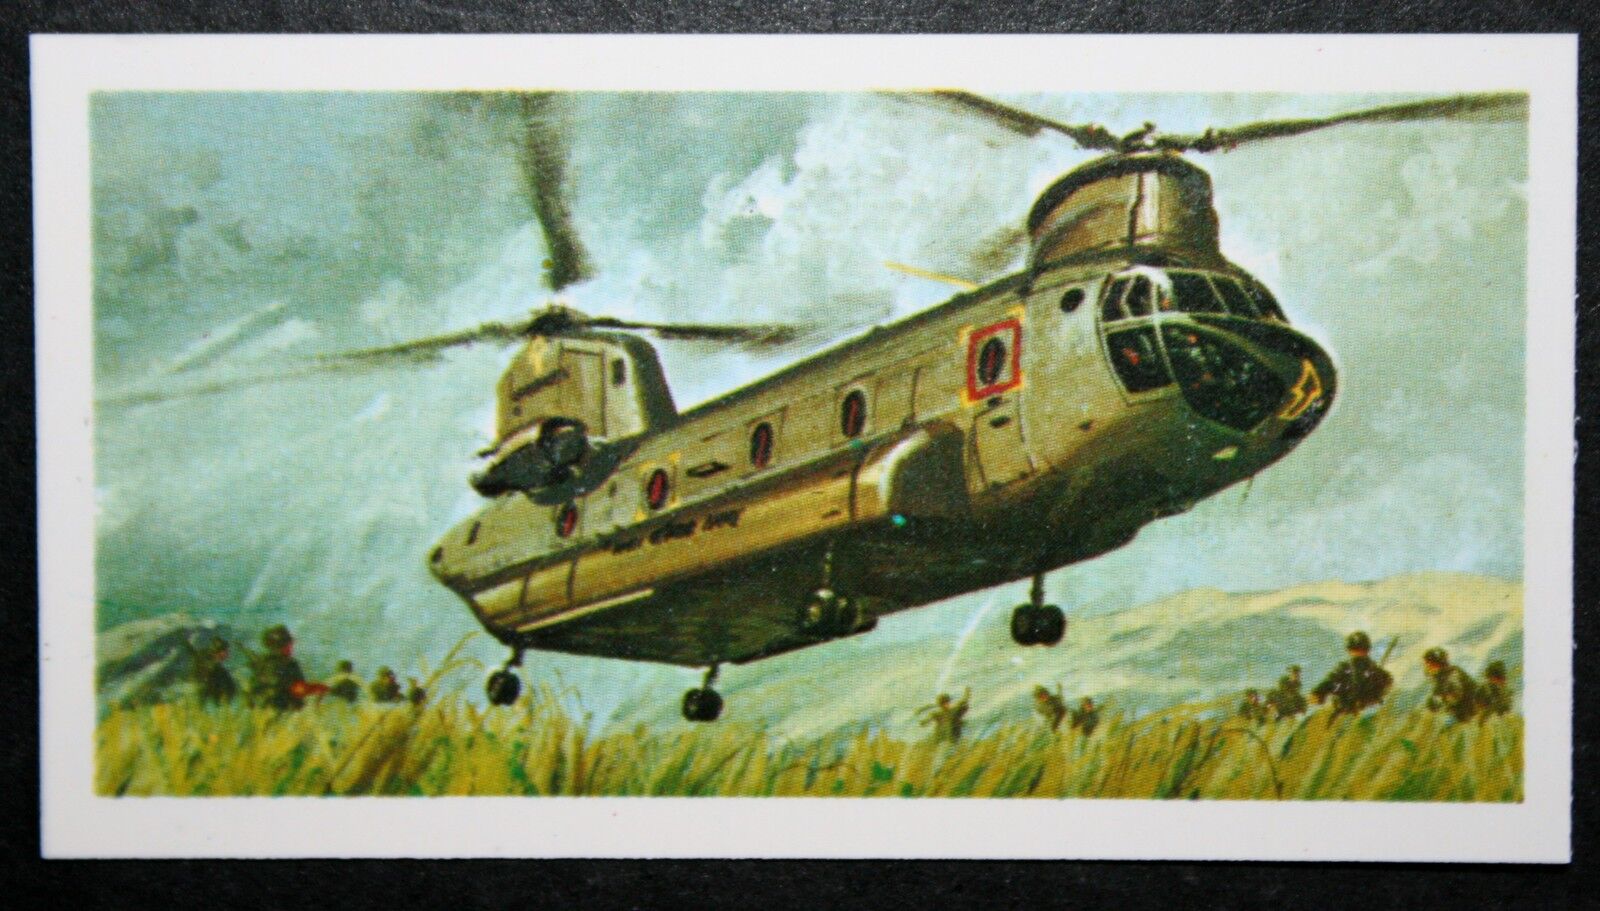 Boeing Chinook Helicopter    Vietnam War     Illustrated  Card  # VGC